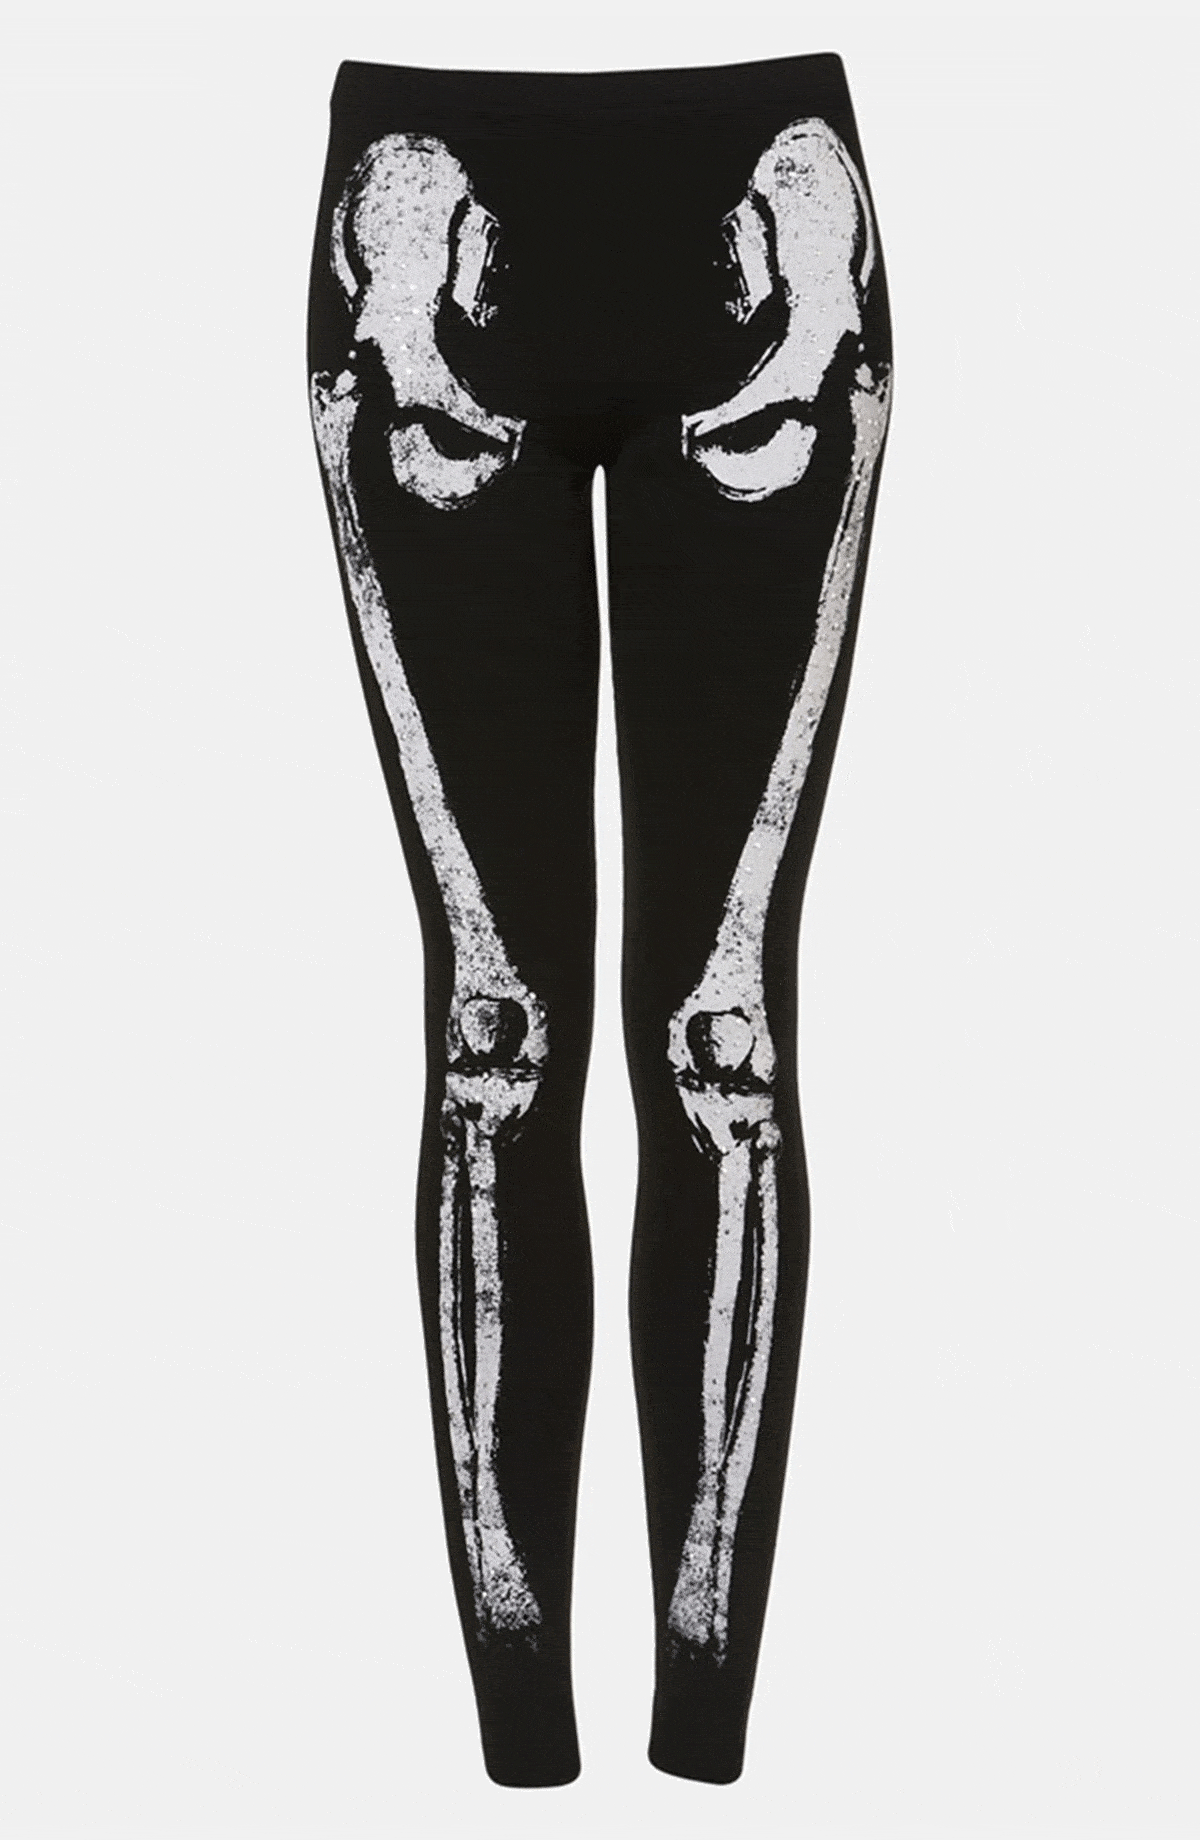 Hand painted skeleton tights